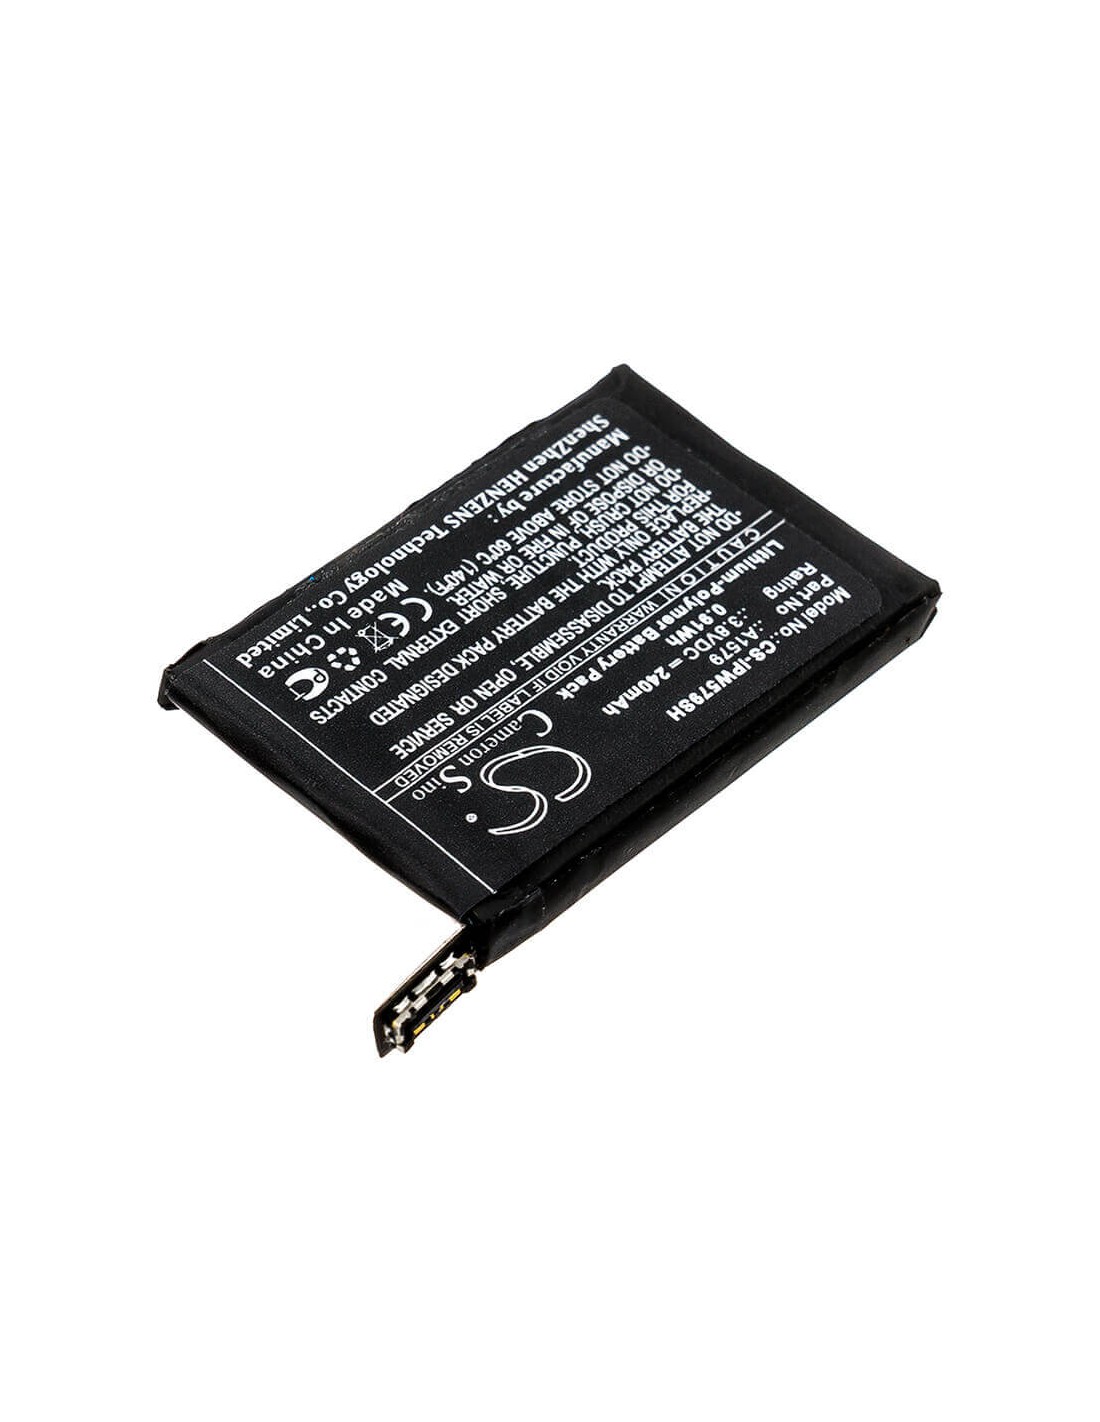 Battery for Apple, Iwach 1 42mm, Watch 1st Gen 42mm, 3.8V, 240mAh - 0.91Wh